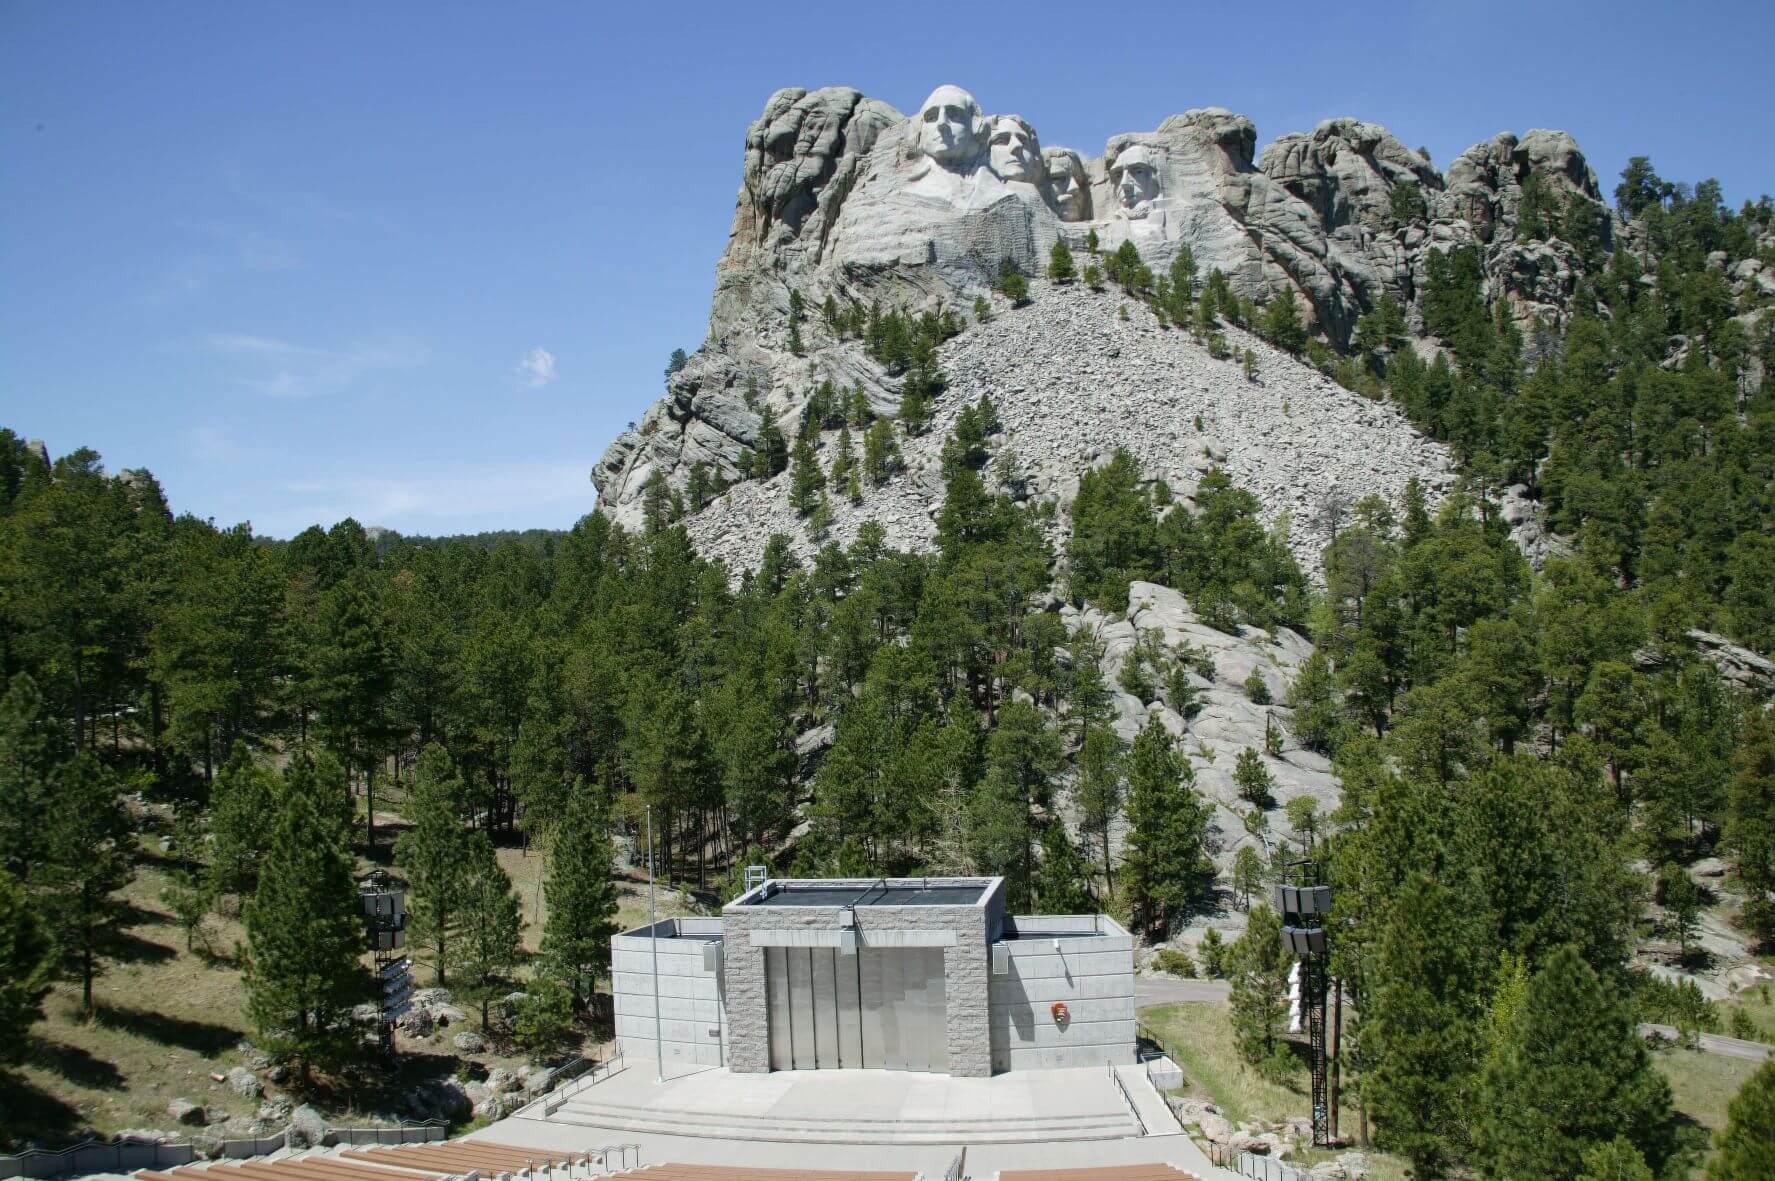 mount rushmore with a concrete state infront